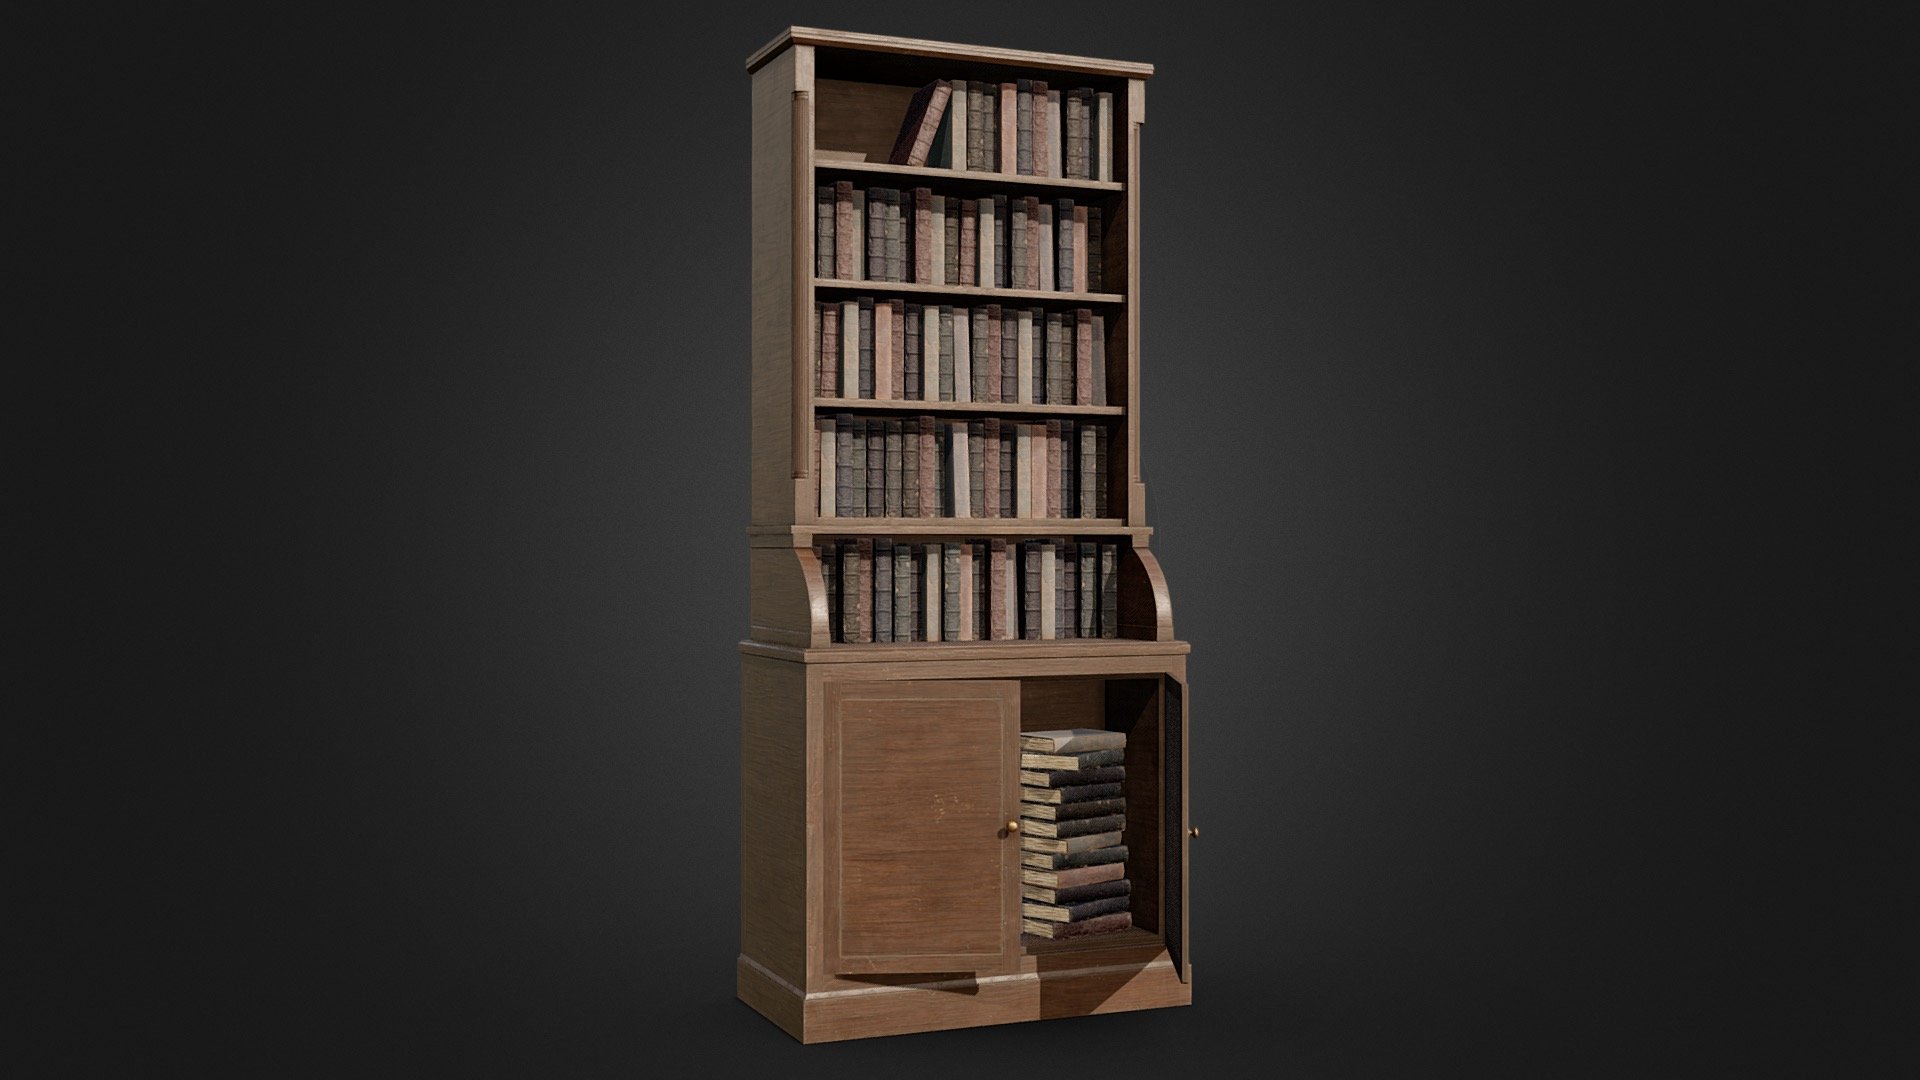 A low-poly, game ready vintage bookcase with books. The model will look great in a Victorian-themed environment and is suitable for use in game, VR, archviz and visual production.

This model is included in the Victorian Bookcase Collection on Sketchfab.

Features




Model includes a Victorian-themed bookcase with books. The cabinet draws can be opened and closed

Model is low-poly and optimised for use in game, VR, archviz, and visual production.

Clean topology. Objects are grouped, named appropriately and unwrapped.

Modelled in Blender and textured in Substance Painter.

6,768 triangle count; 4,440 vertices.

Textures

Model has 1 PBR texture set. Textures are in .png at 4096x4096 and includes: Base Colour, Metallic, Roughness, Normal 3d model